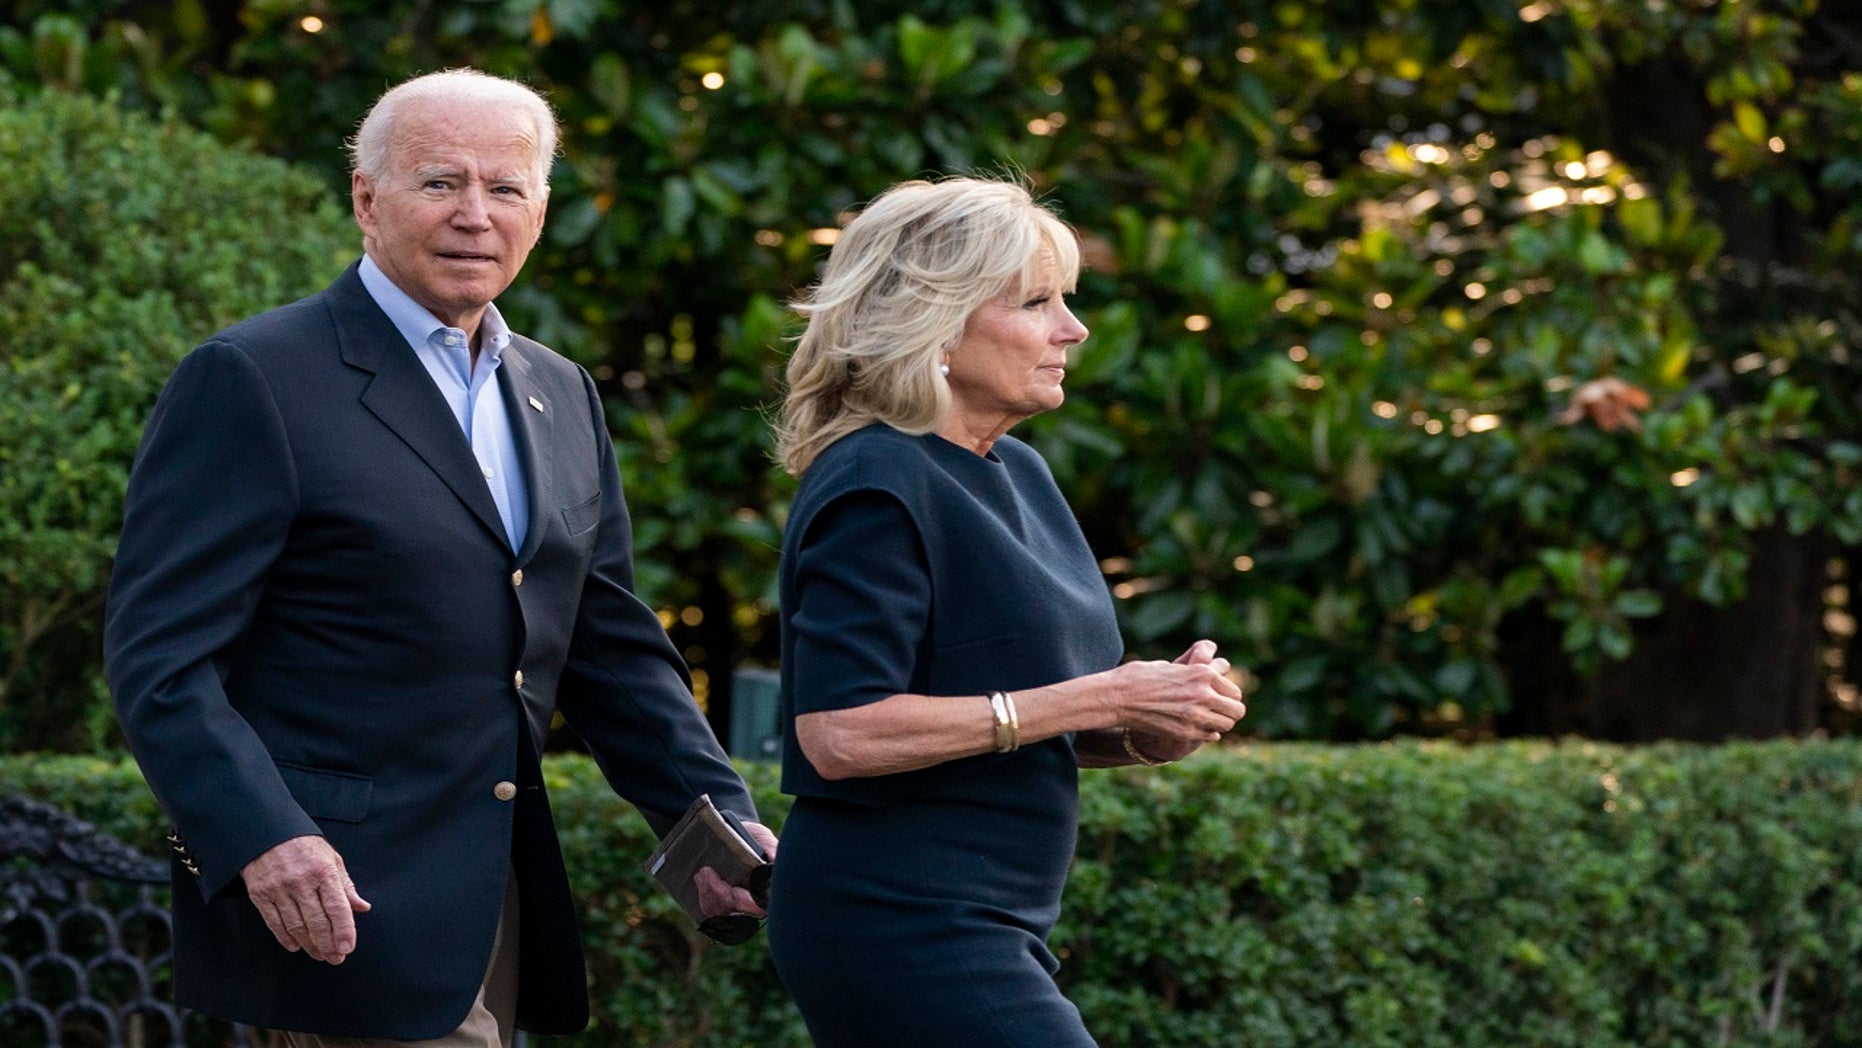 First lady Jill Biden dismisses concerns about president’s mental fitness: ‘Ridiculous’